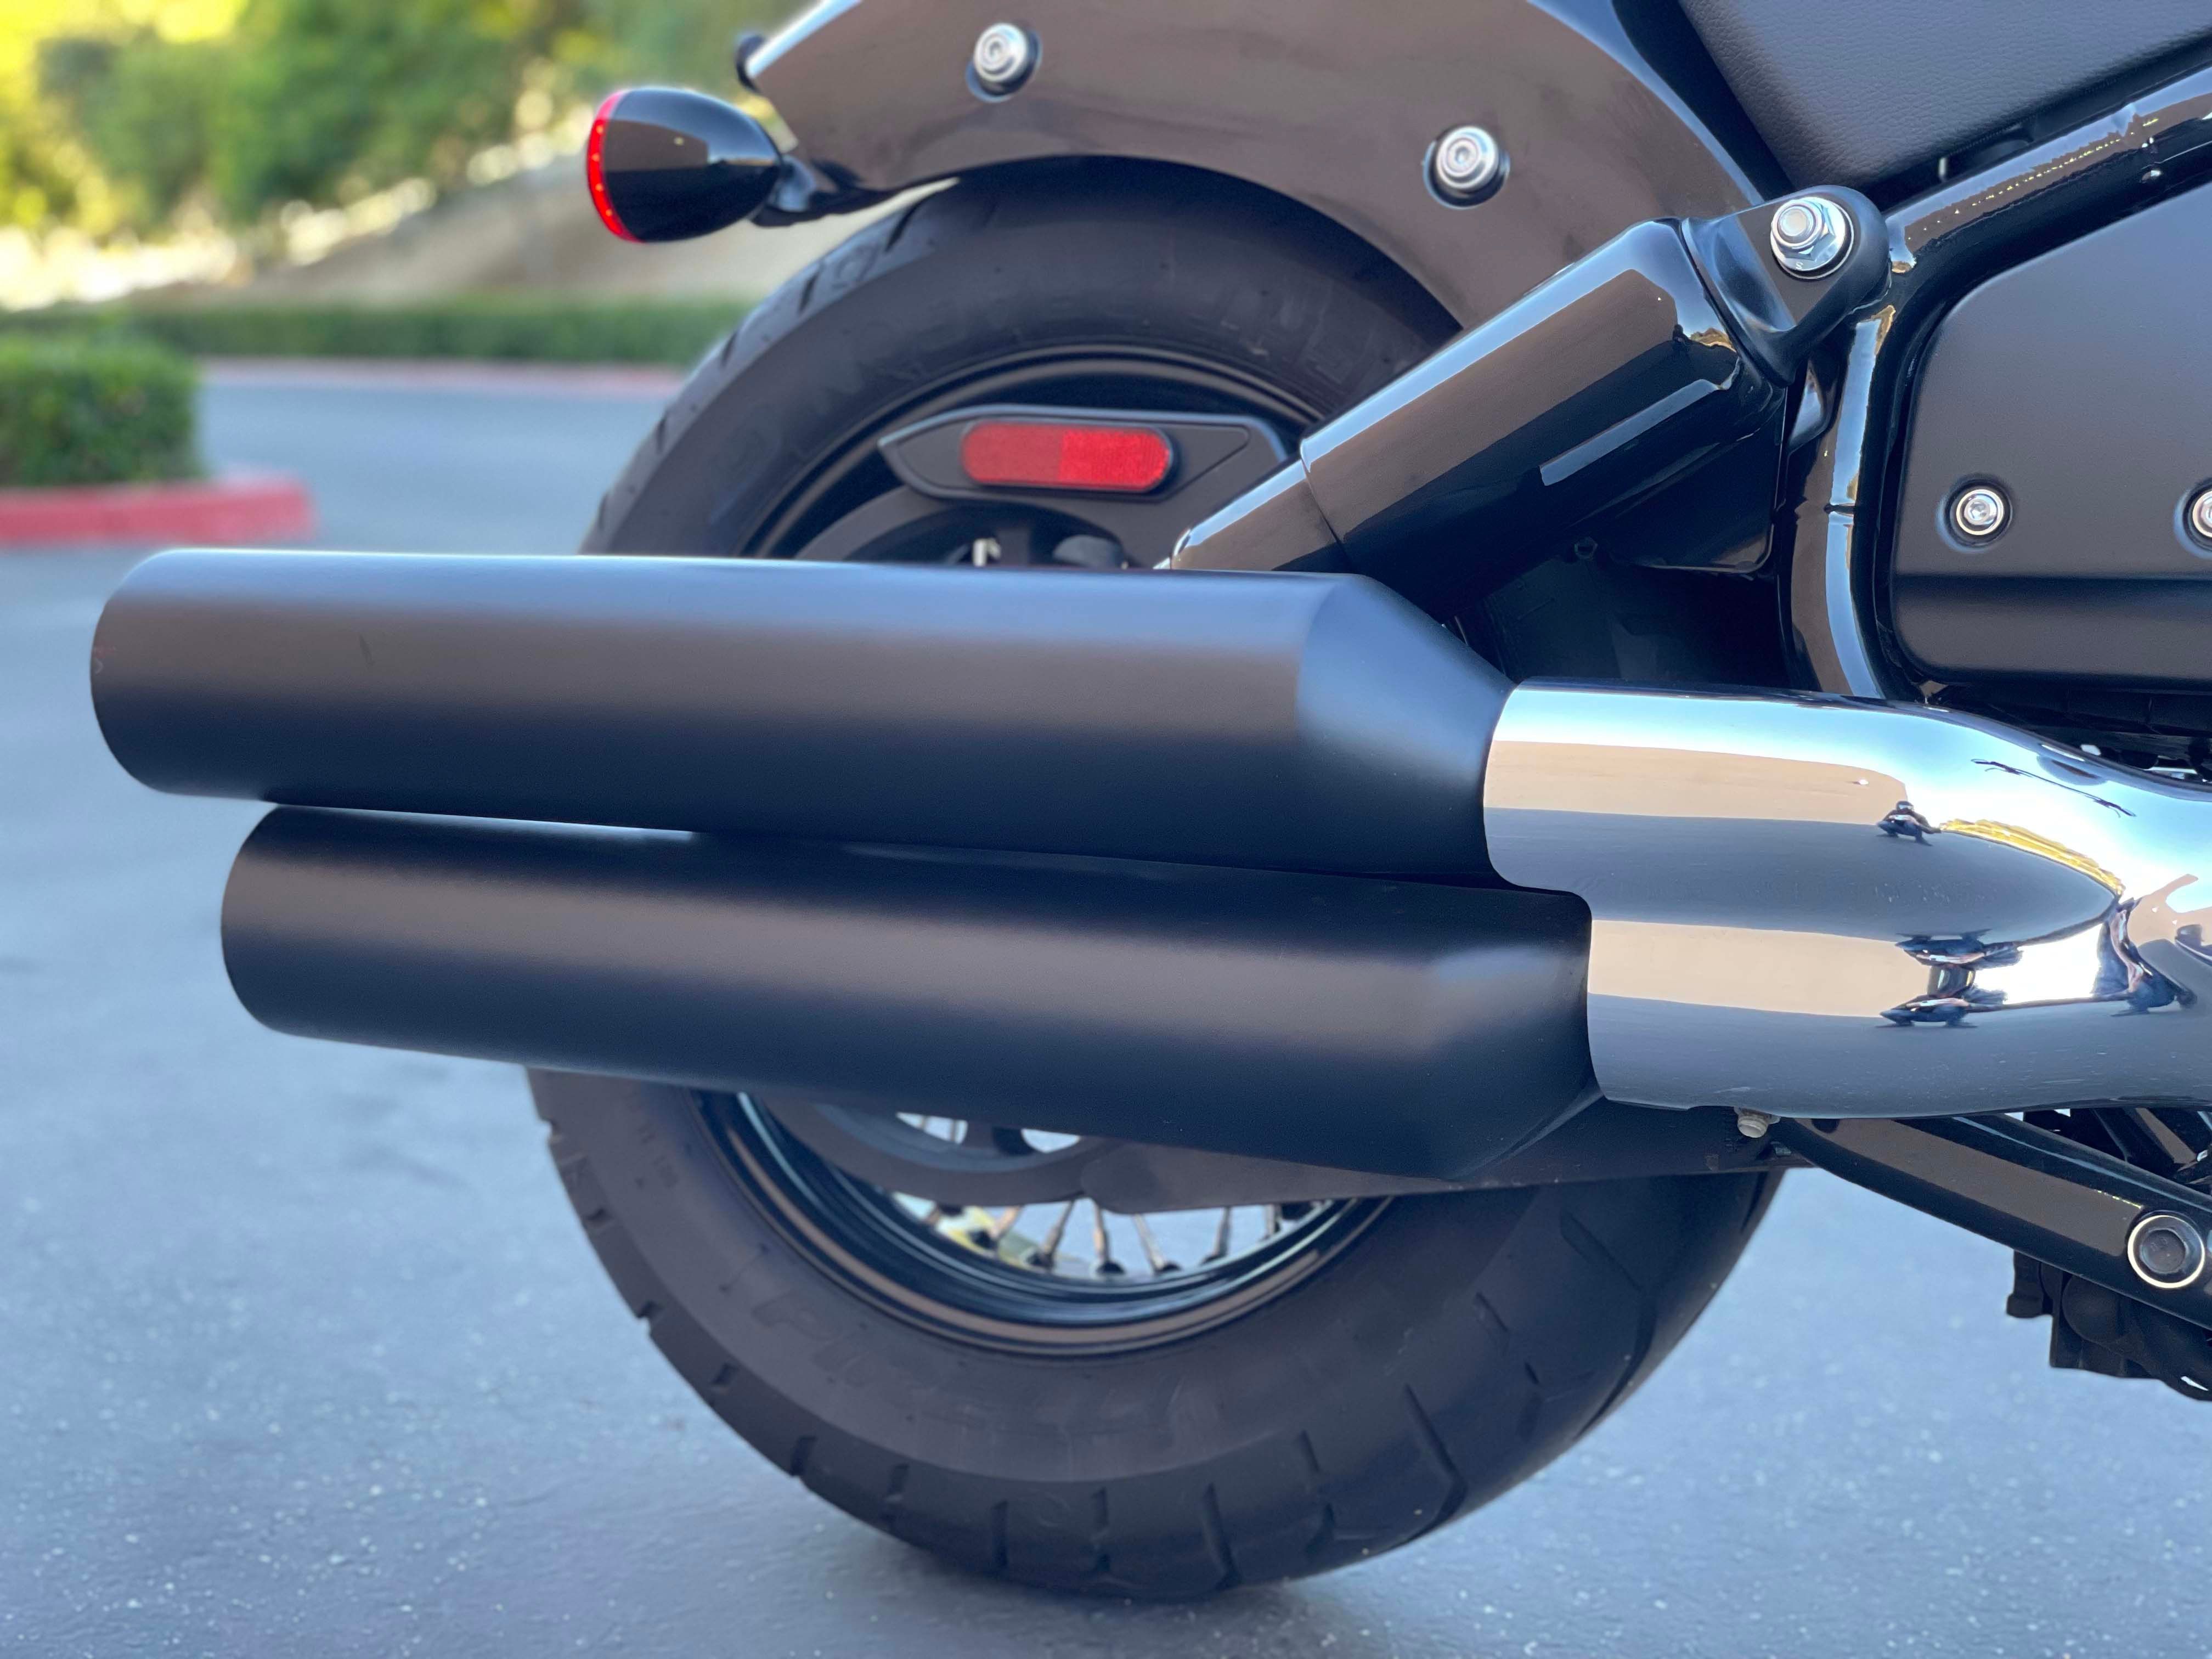 2022 Indian Chief Bobber First Ride Exhaust